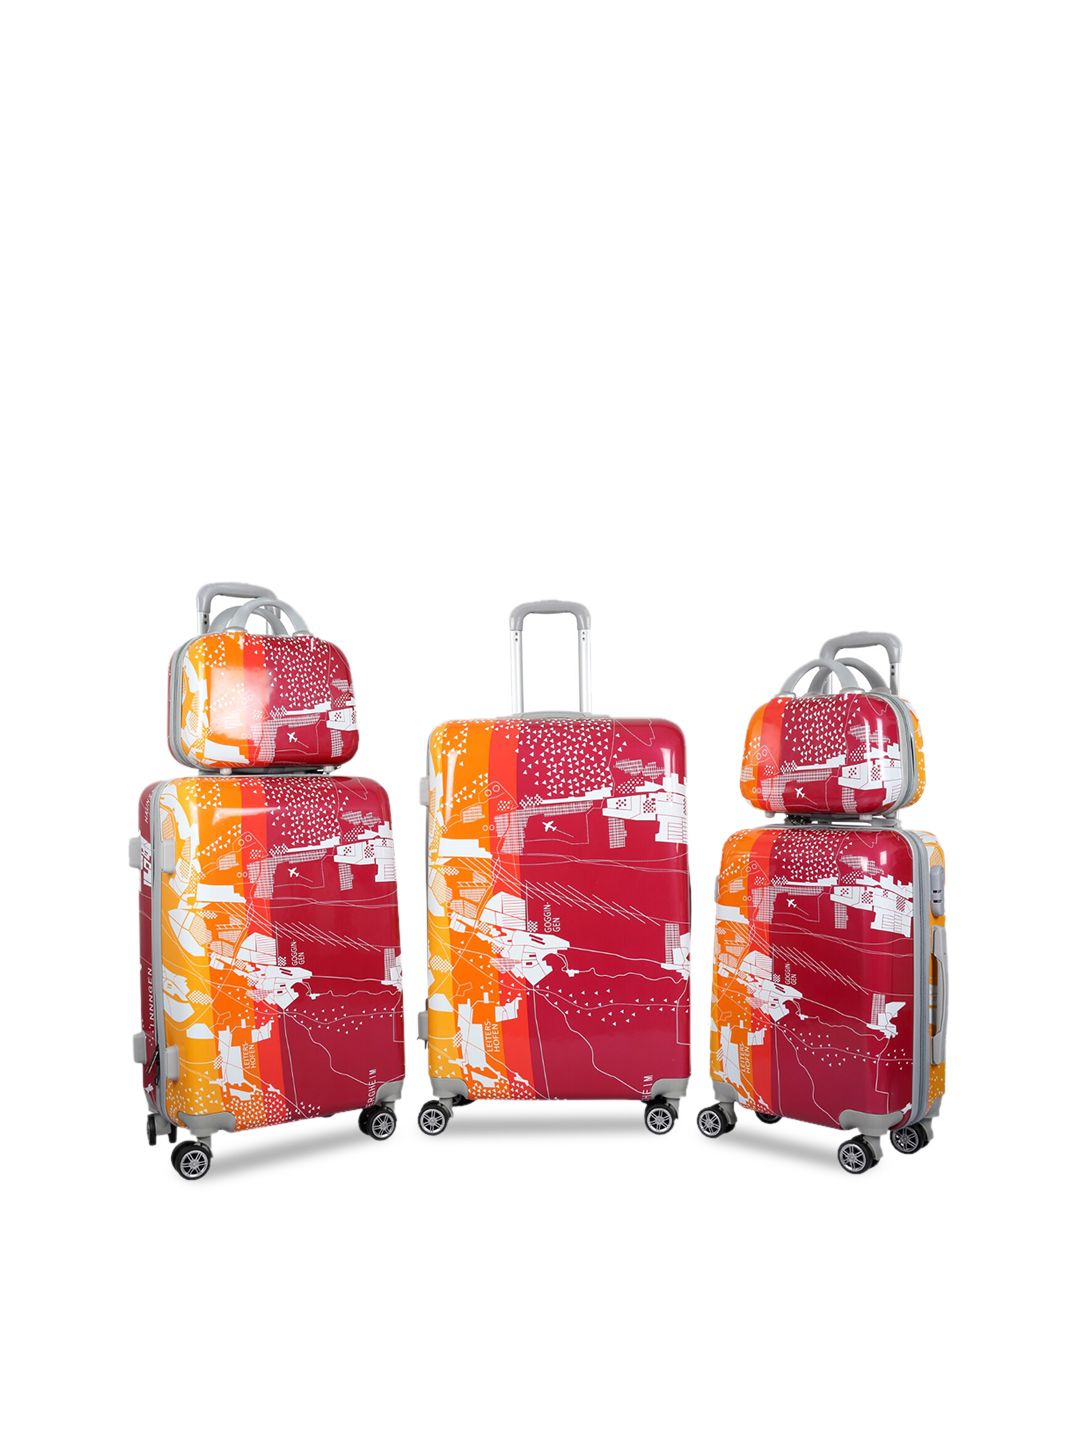 Polo Class Unisex Set Of 5 Orange & Red Printed Trolley & Vanity Bags Price in India